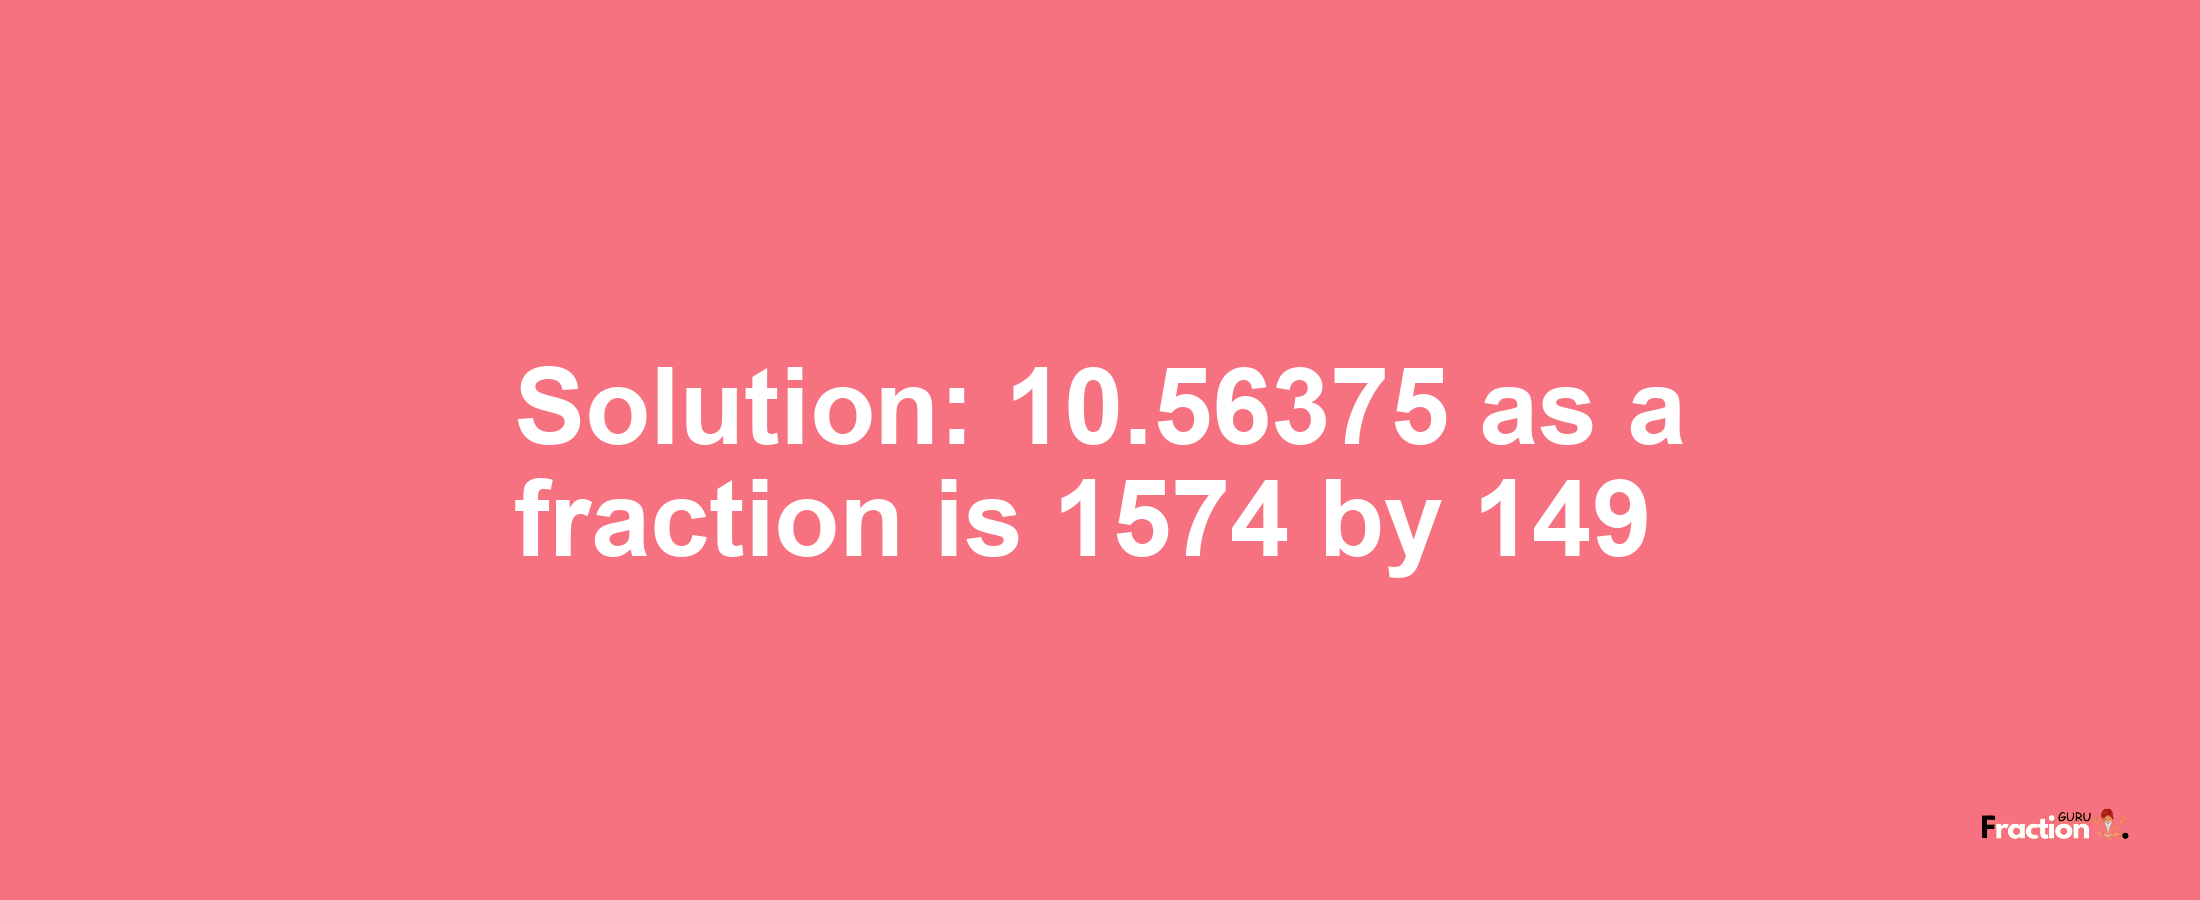 Solution:10.56375 as a fraction is 1574/149